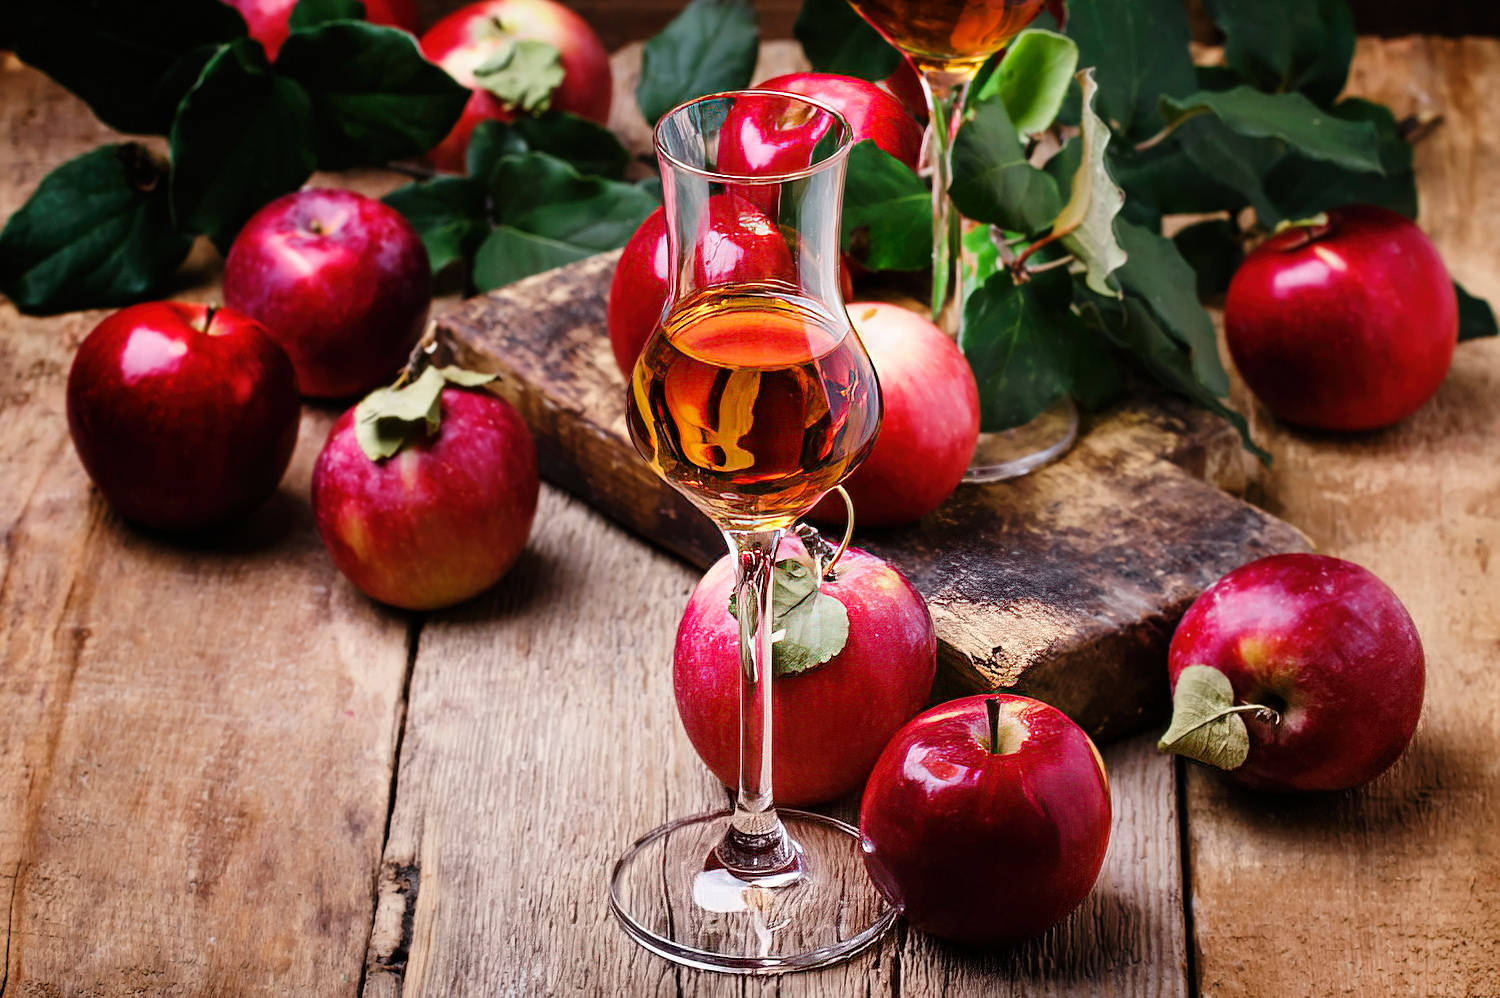 A glass of calvados surrounded by red apples on a wooden background